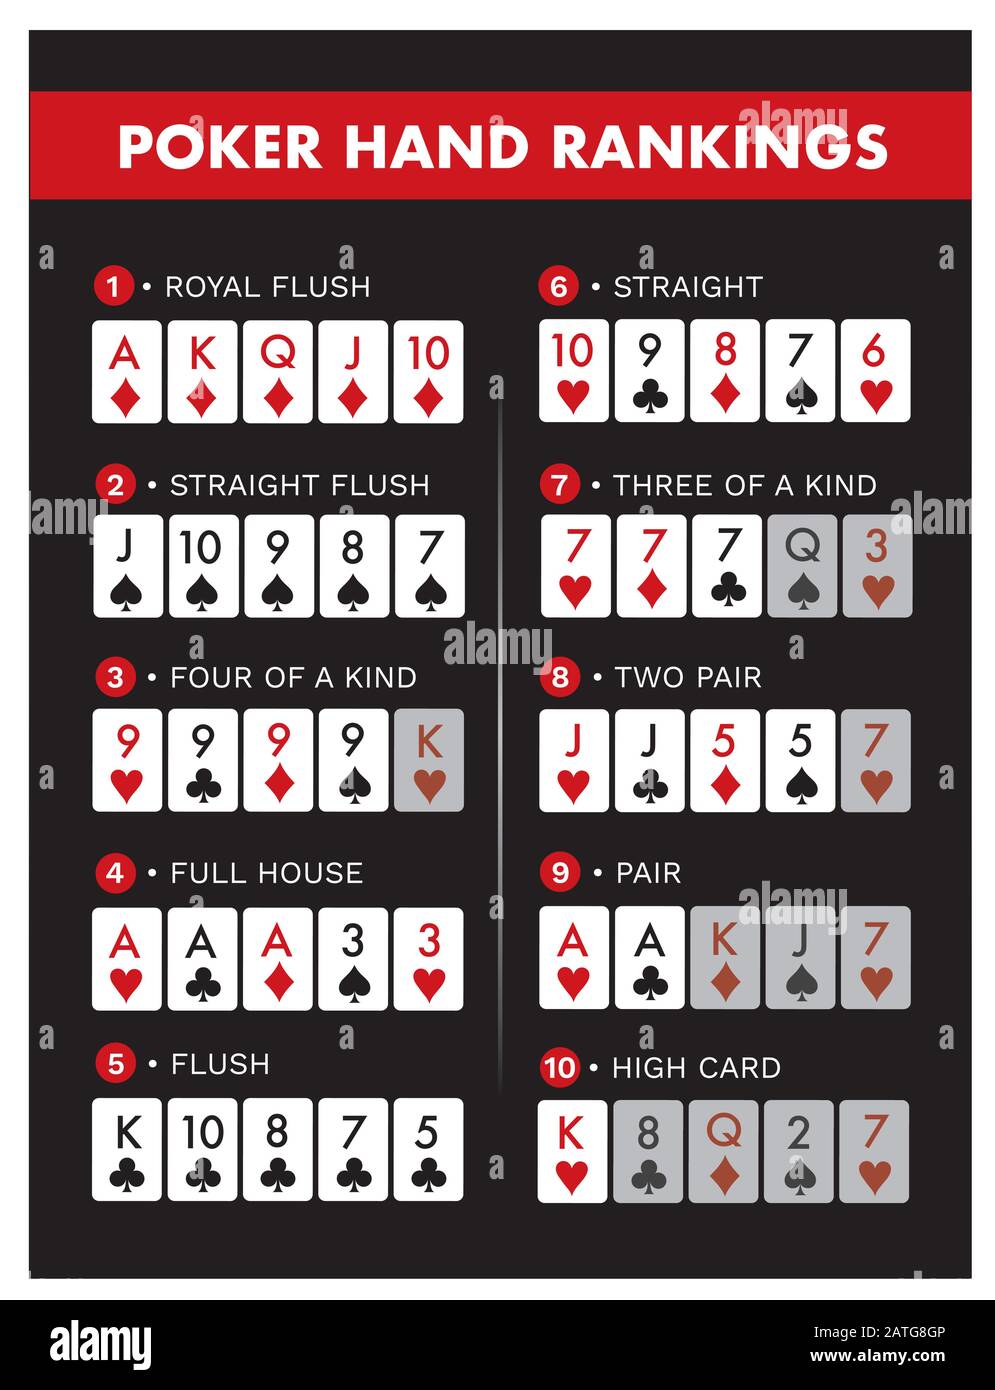 20 Myths About poker straight flush in 2021